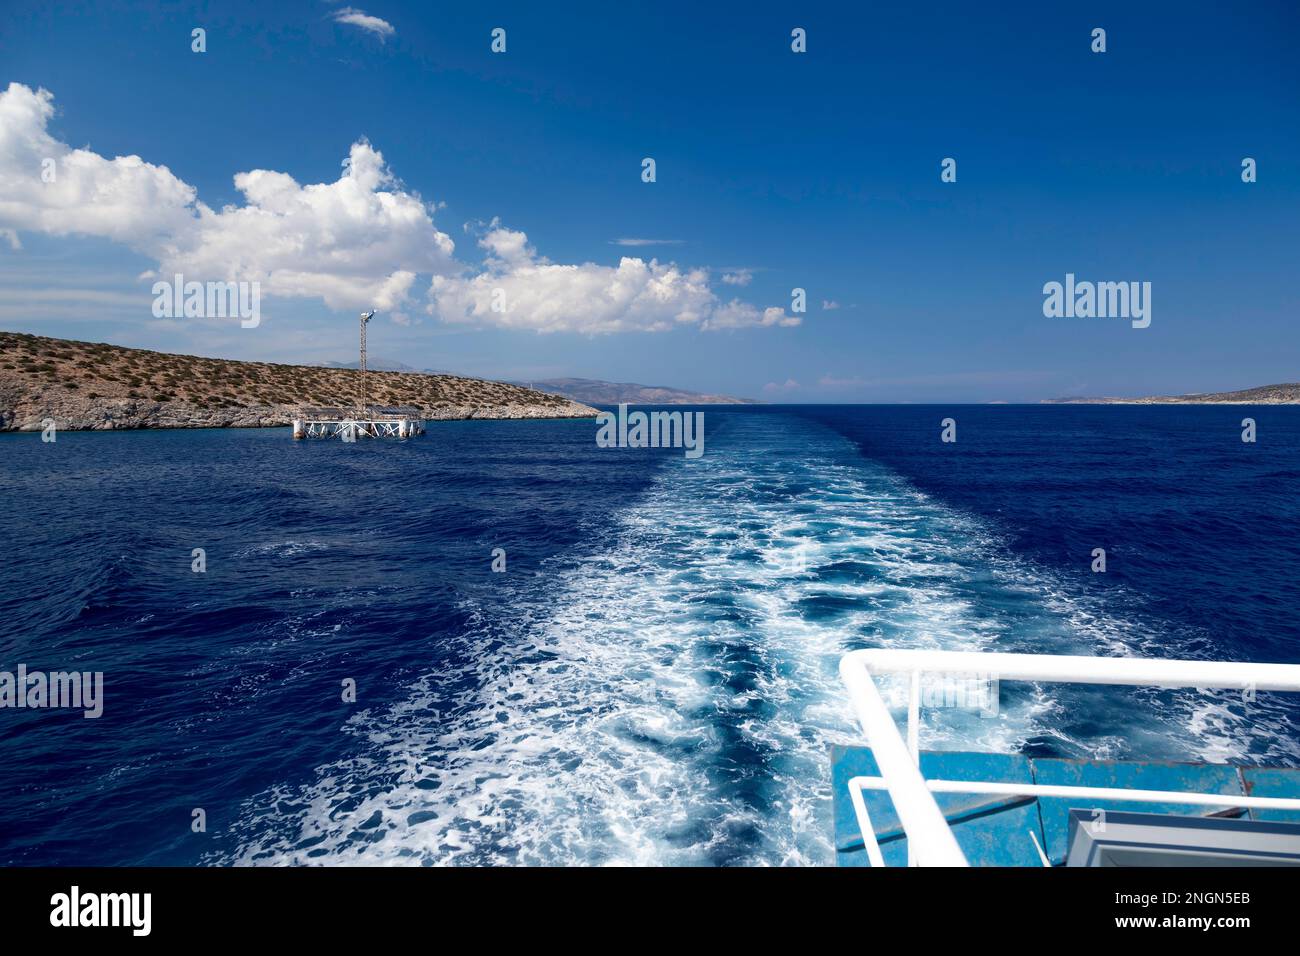 View of the sea line and ship waves as the local ferry boat is leaving the island of Iraklia, in Lesser Cyclades, Greece. Stock Photo